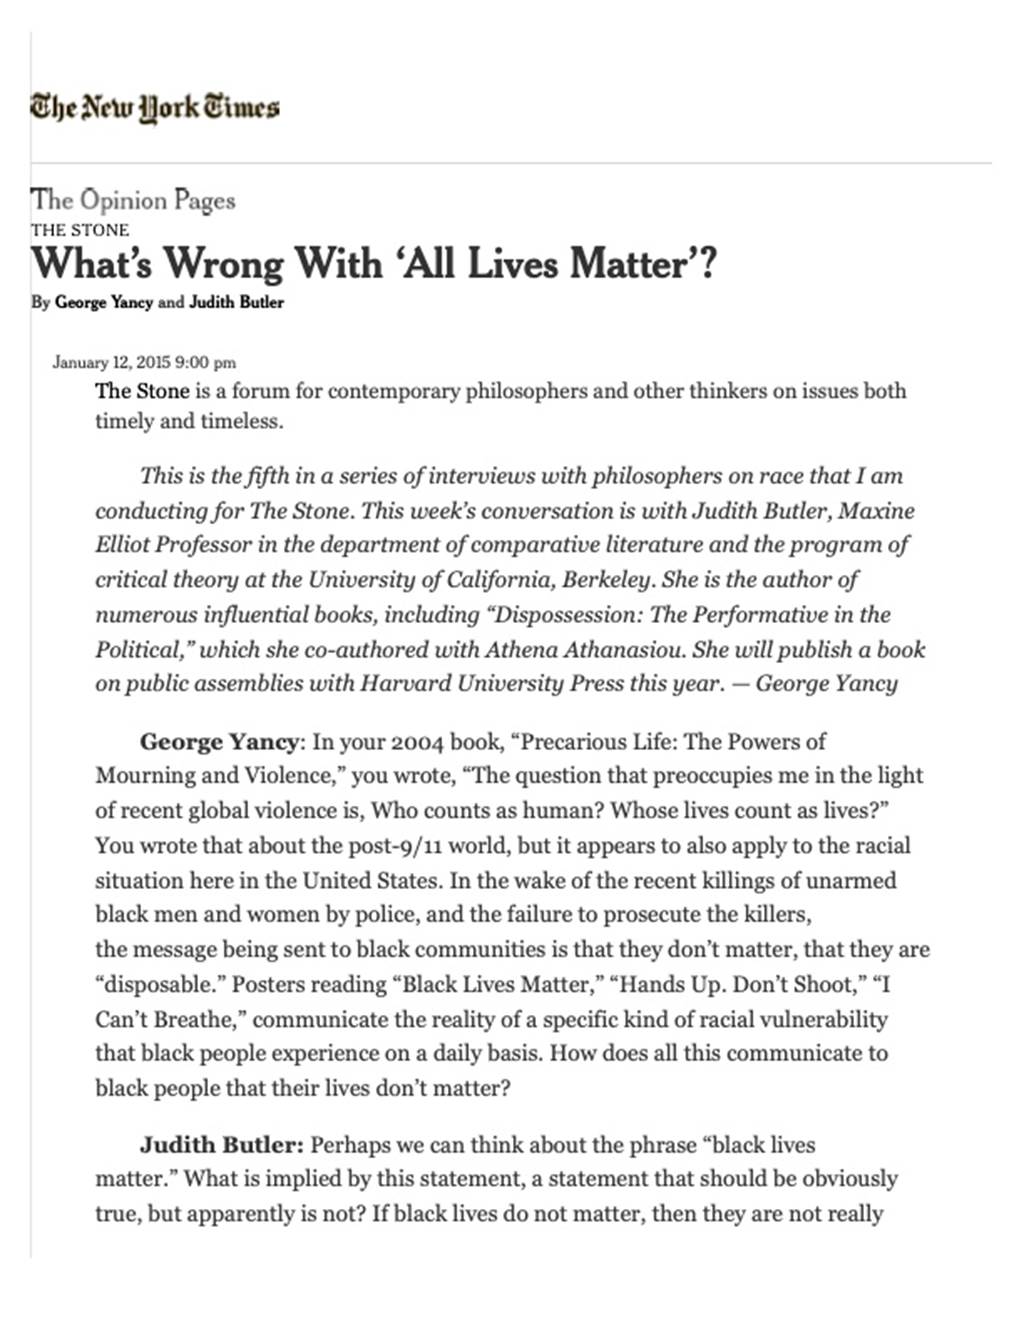 What’s Wrong With ‘All Lives Matter’? - image